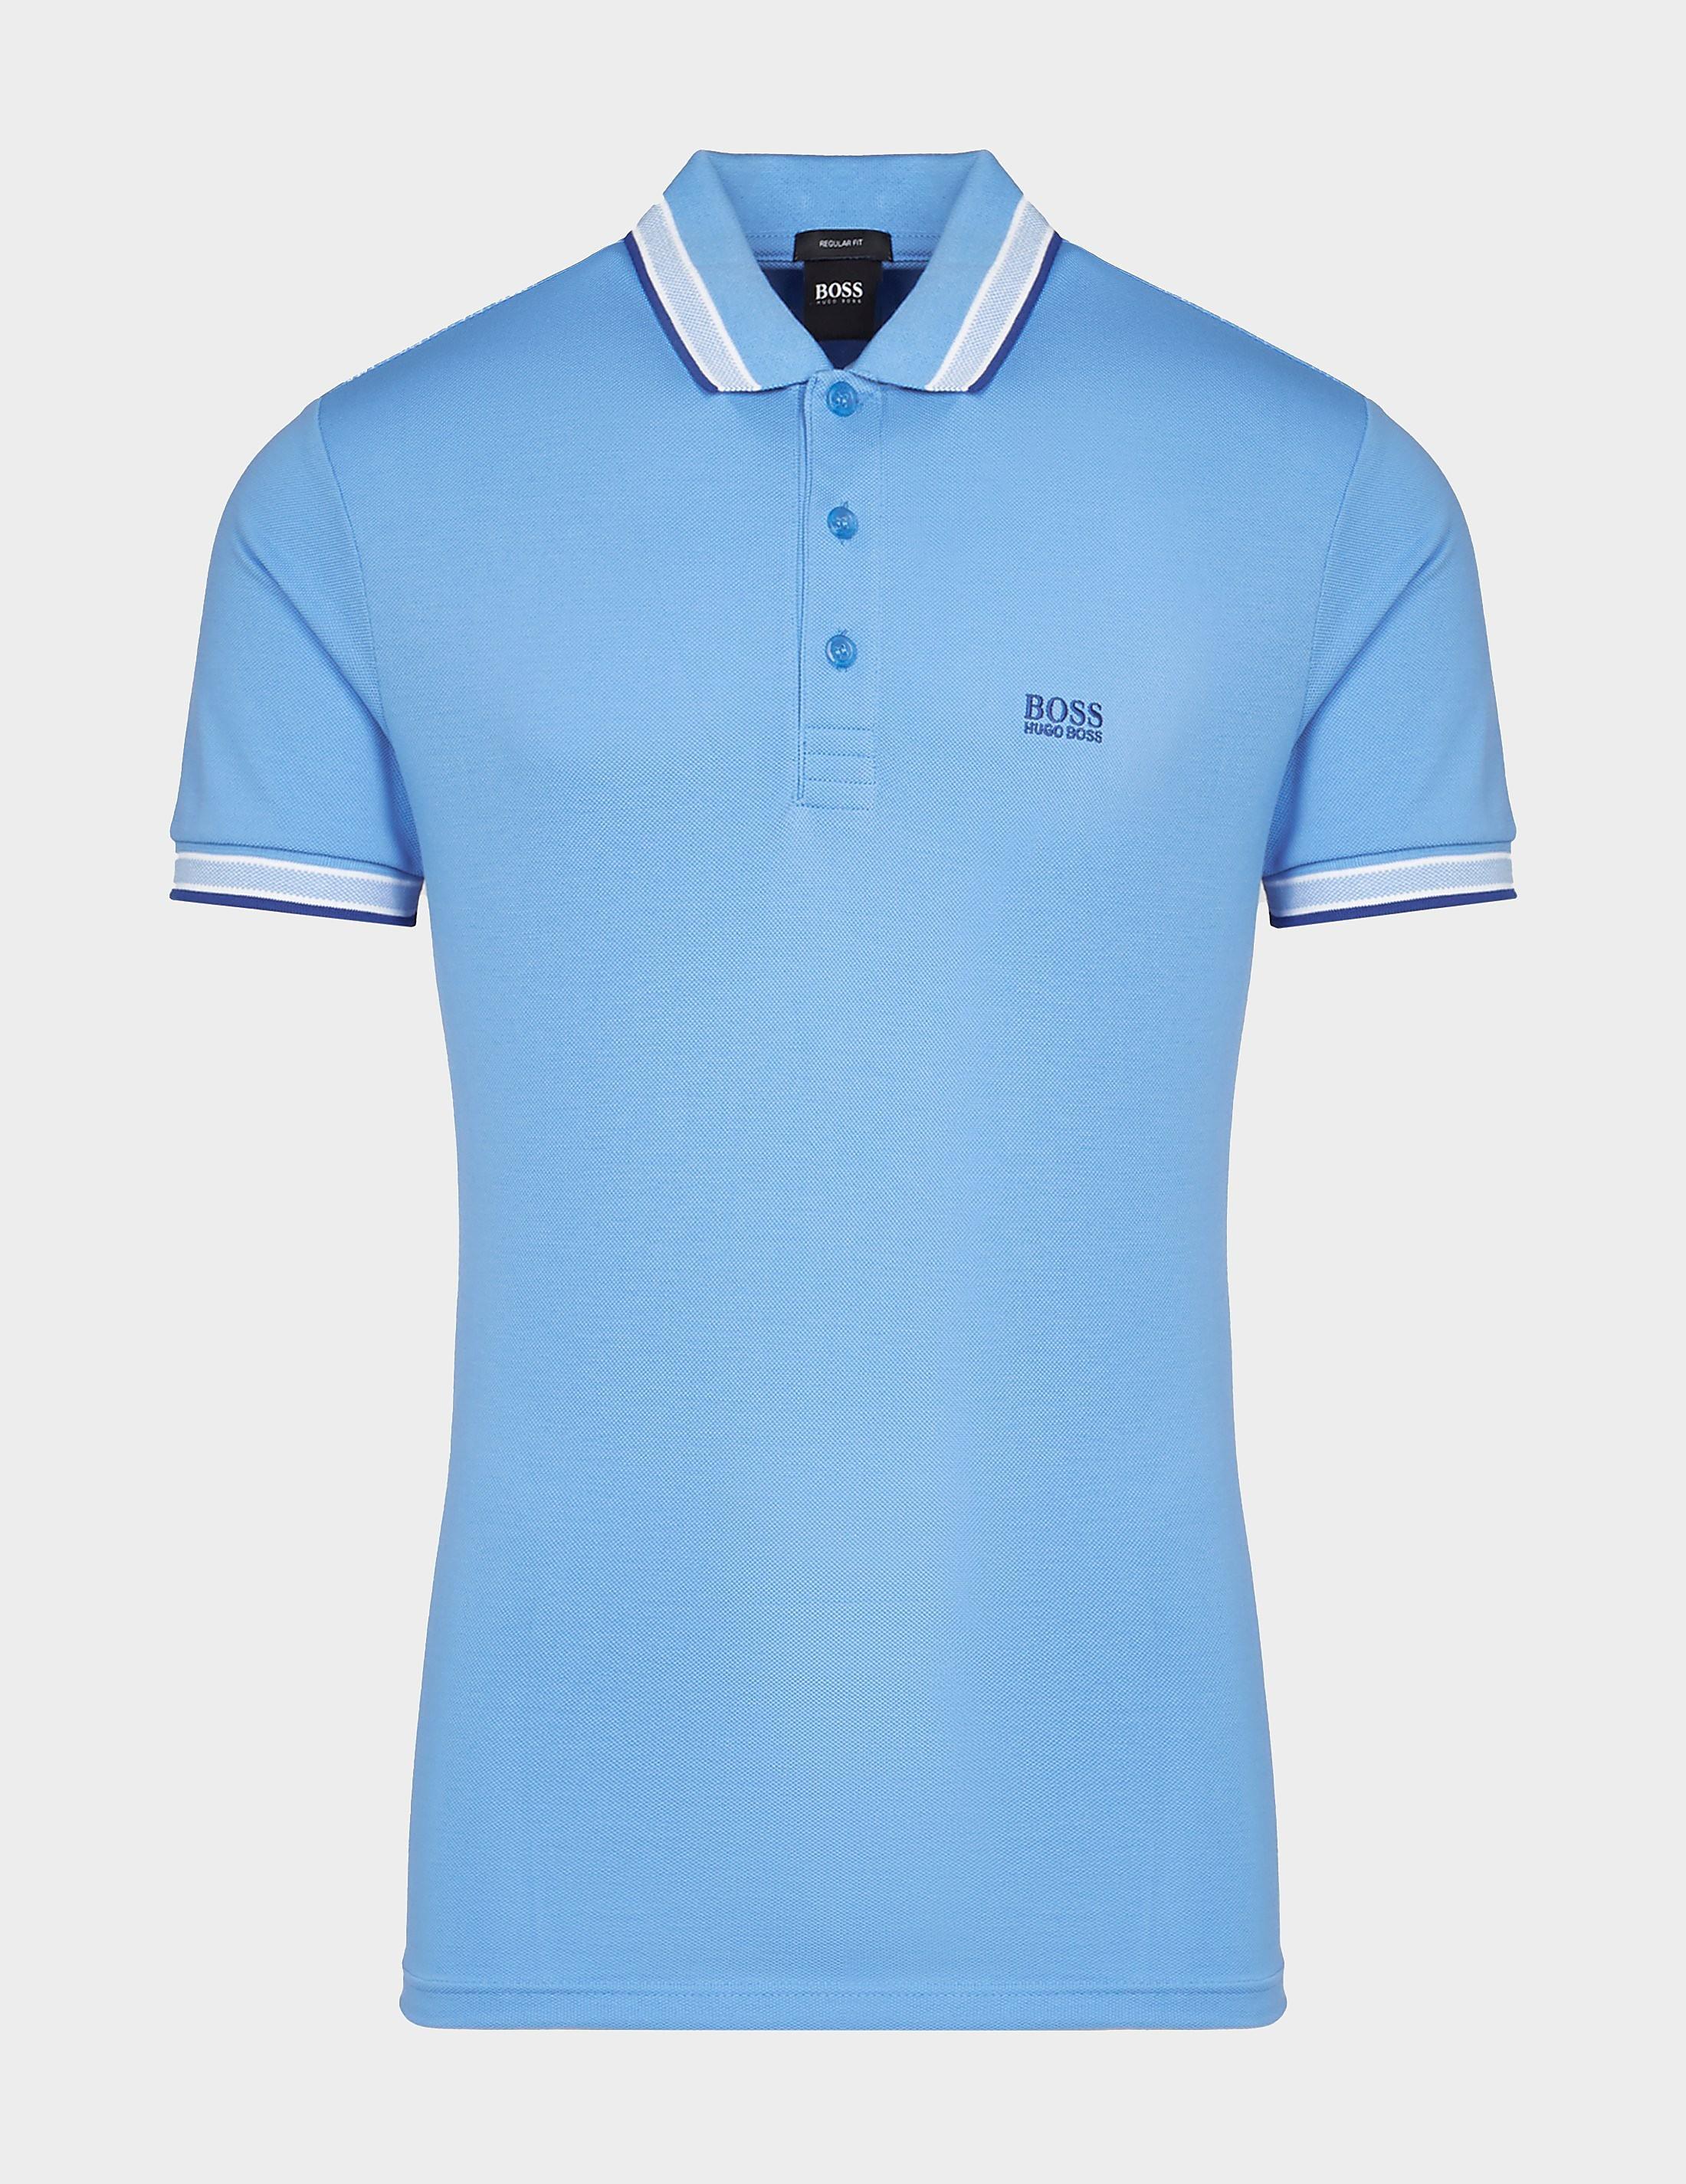 BOSS by HUGO BOSS Paddy Polo Shirt in Blue for Men - Lyst